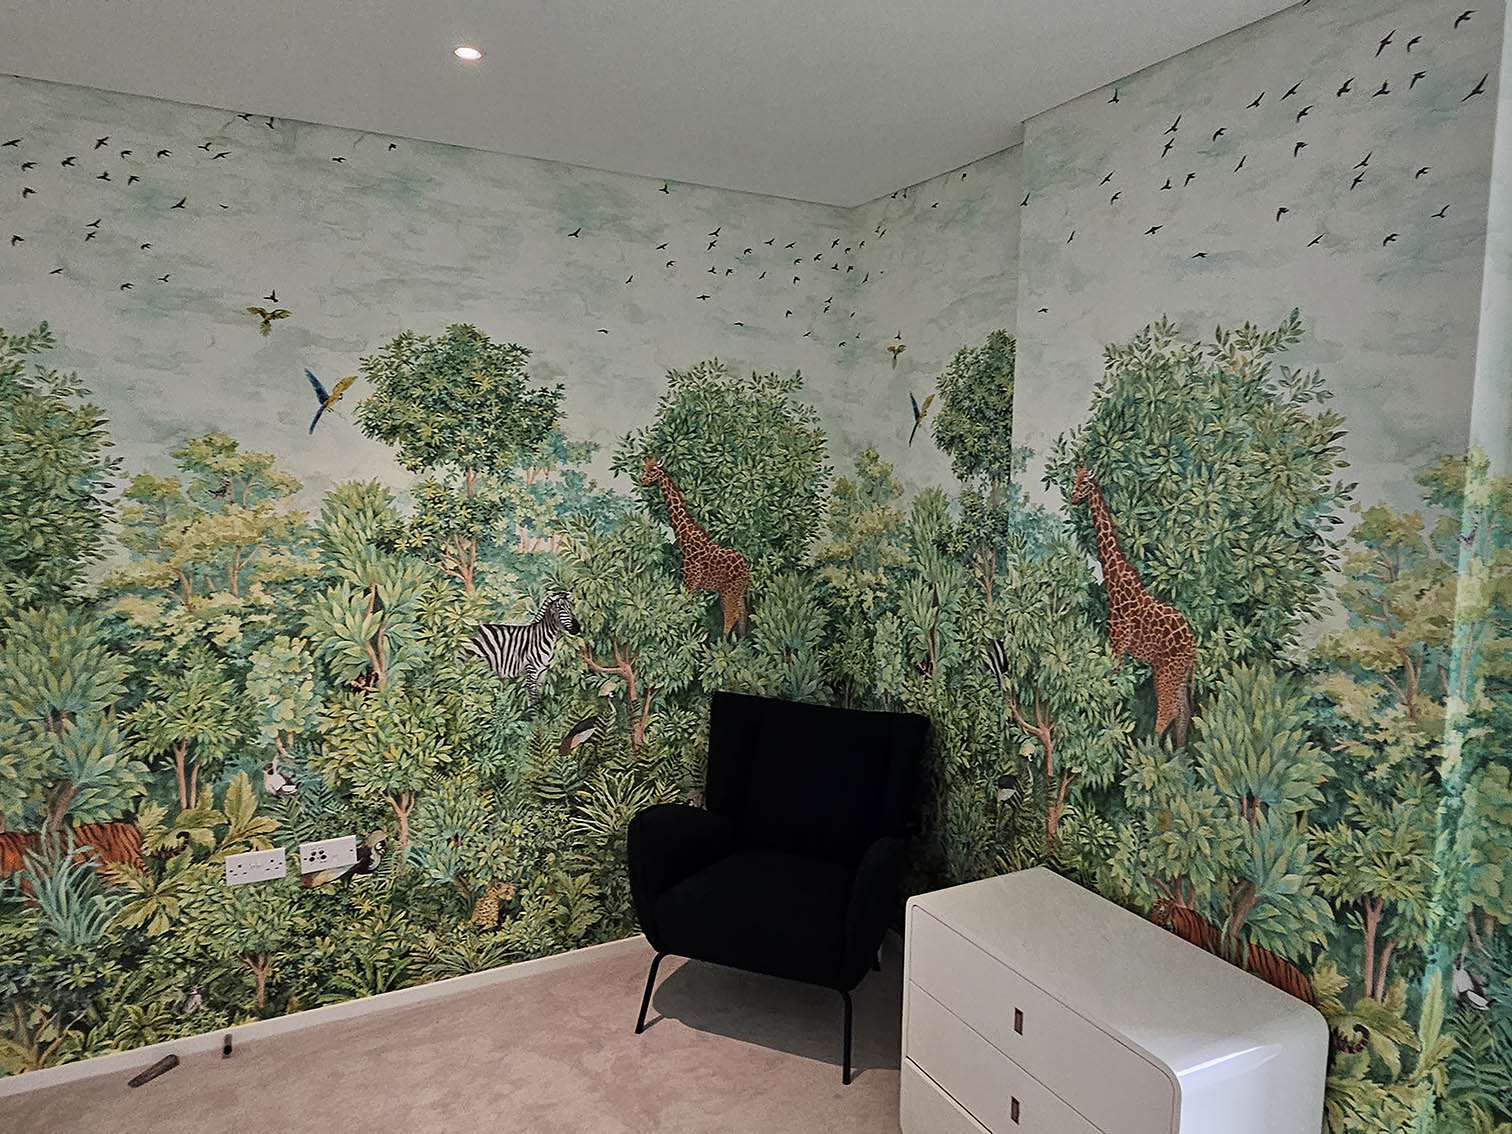 Digitally printed wallpaper installation in kids bedroom green plants, trees, animals and birds by Bluespec Decorating Limited.